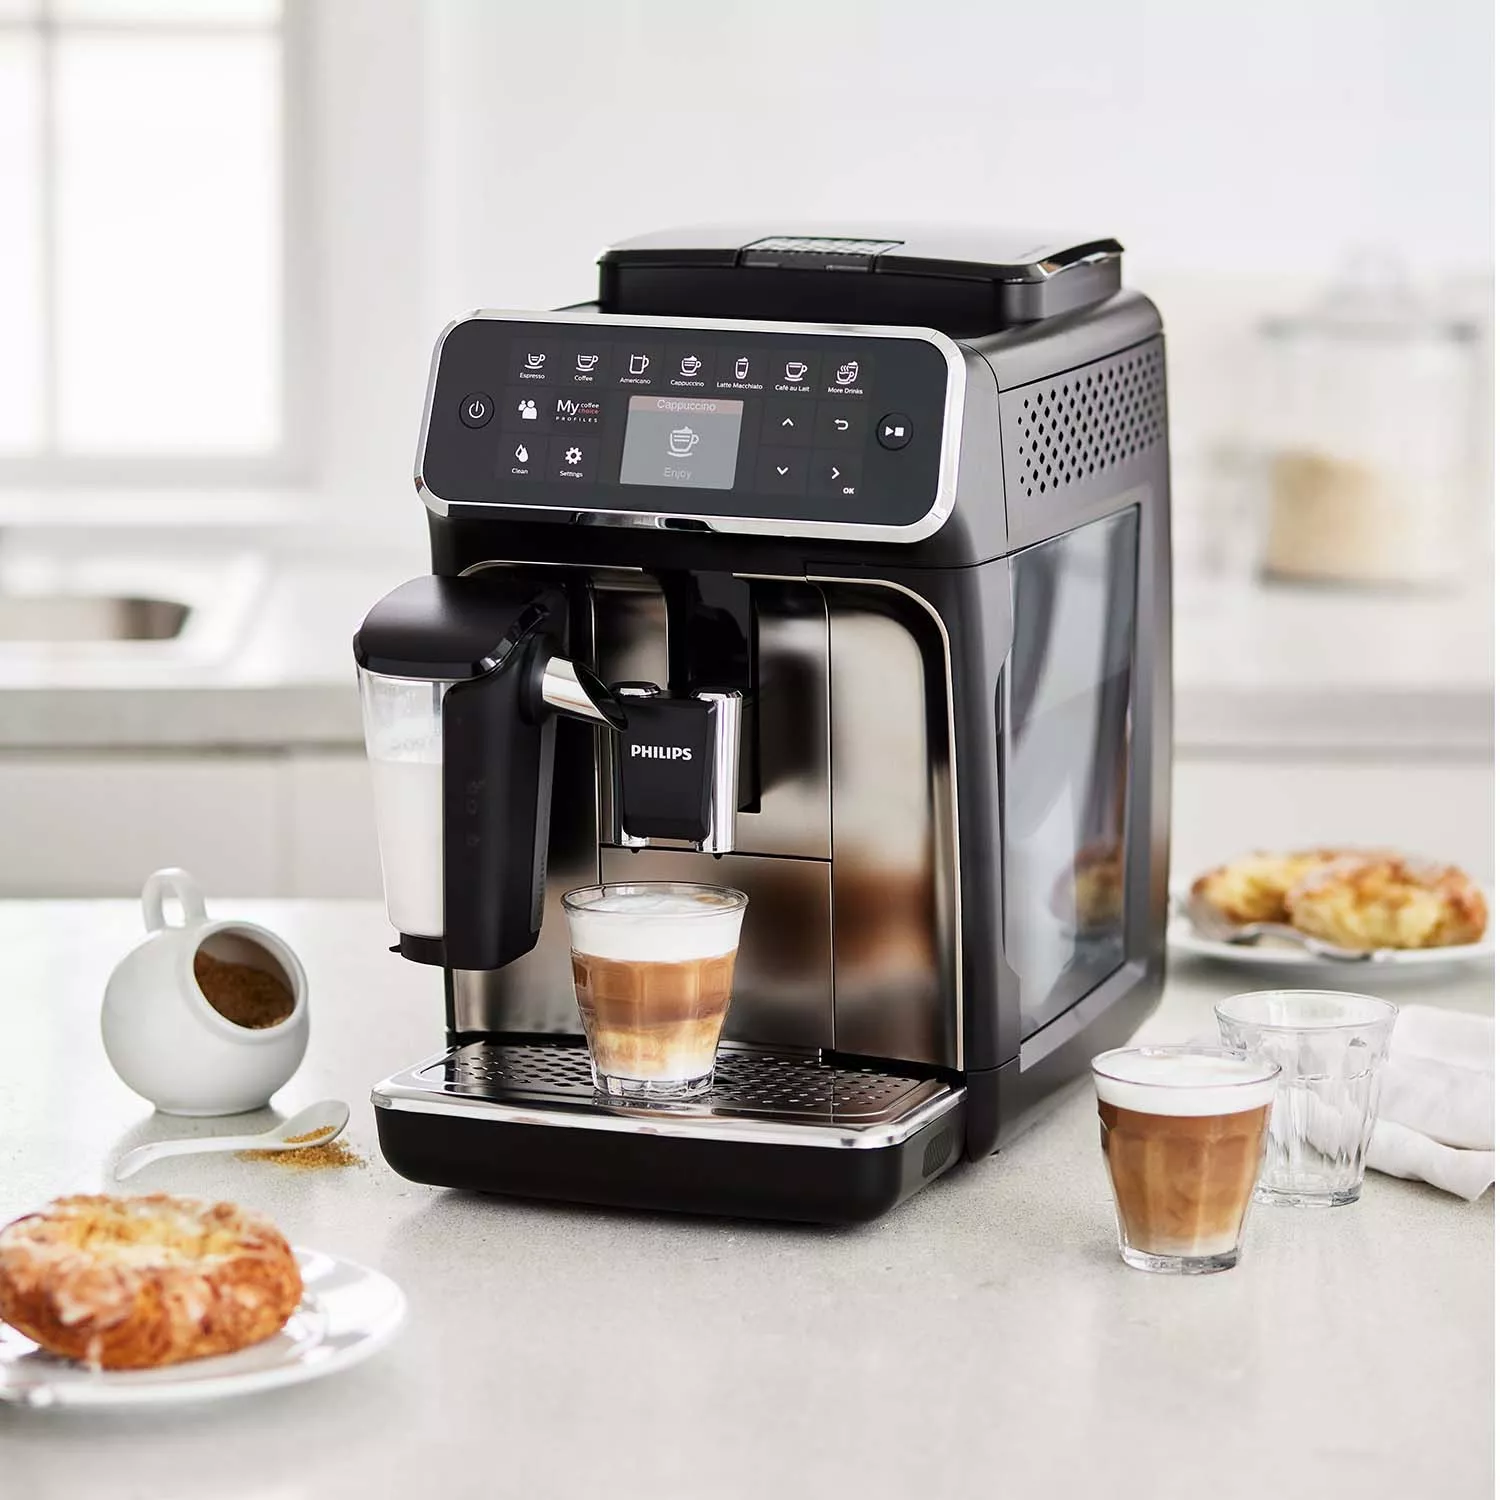 How to Clean a Philips Espresso Machine